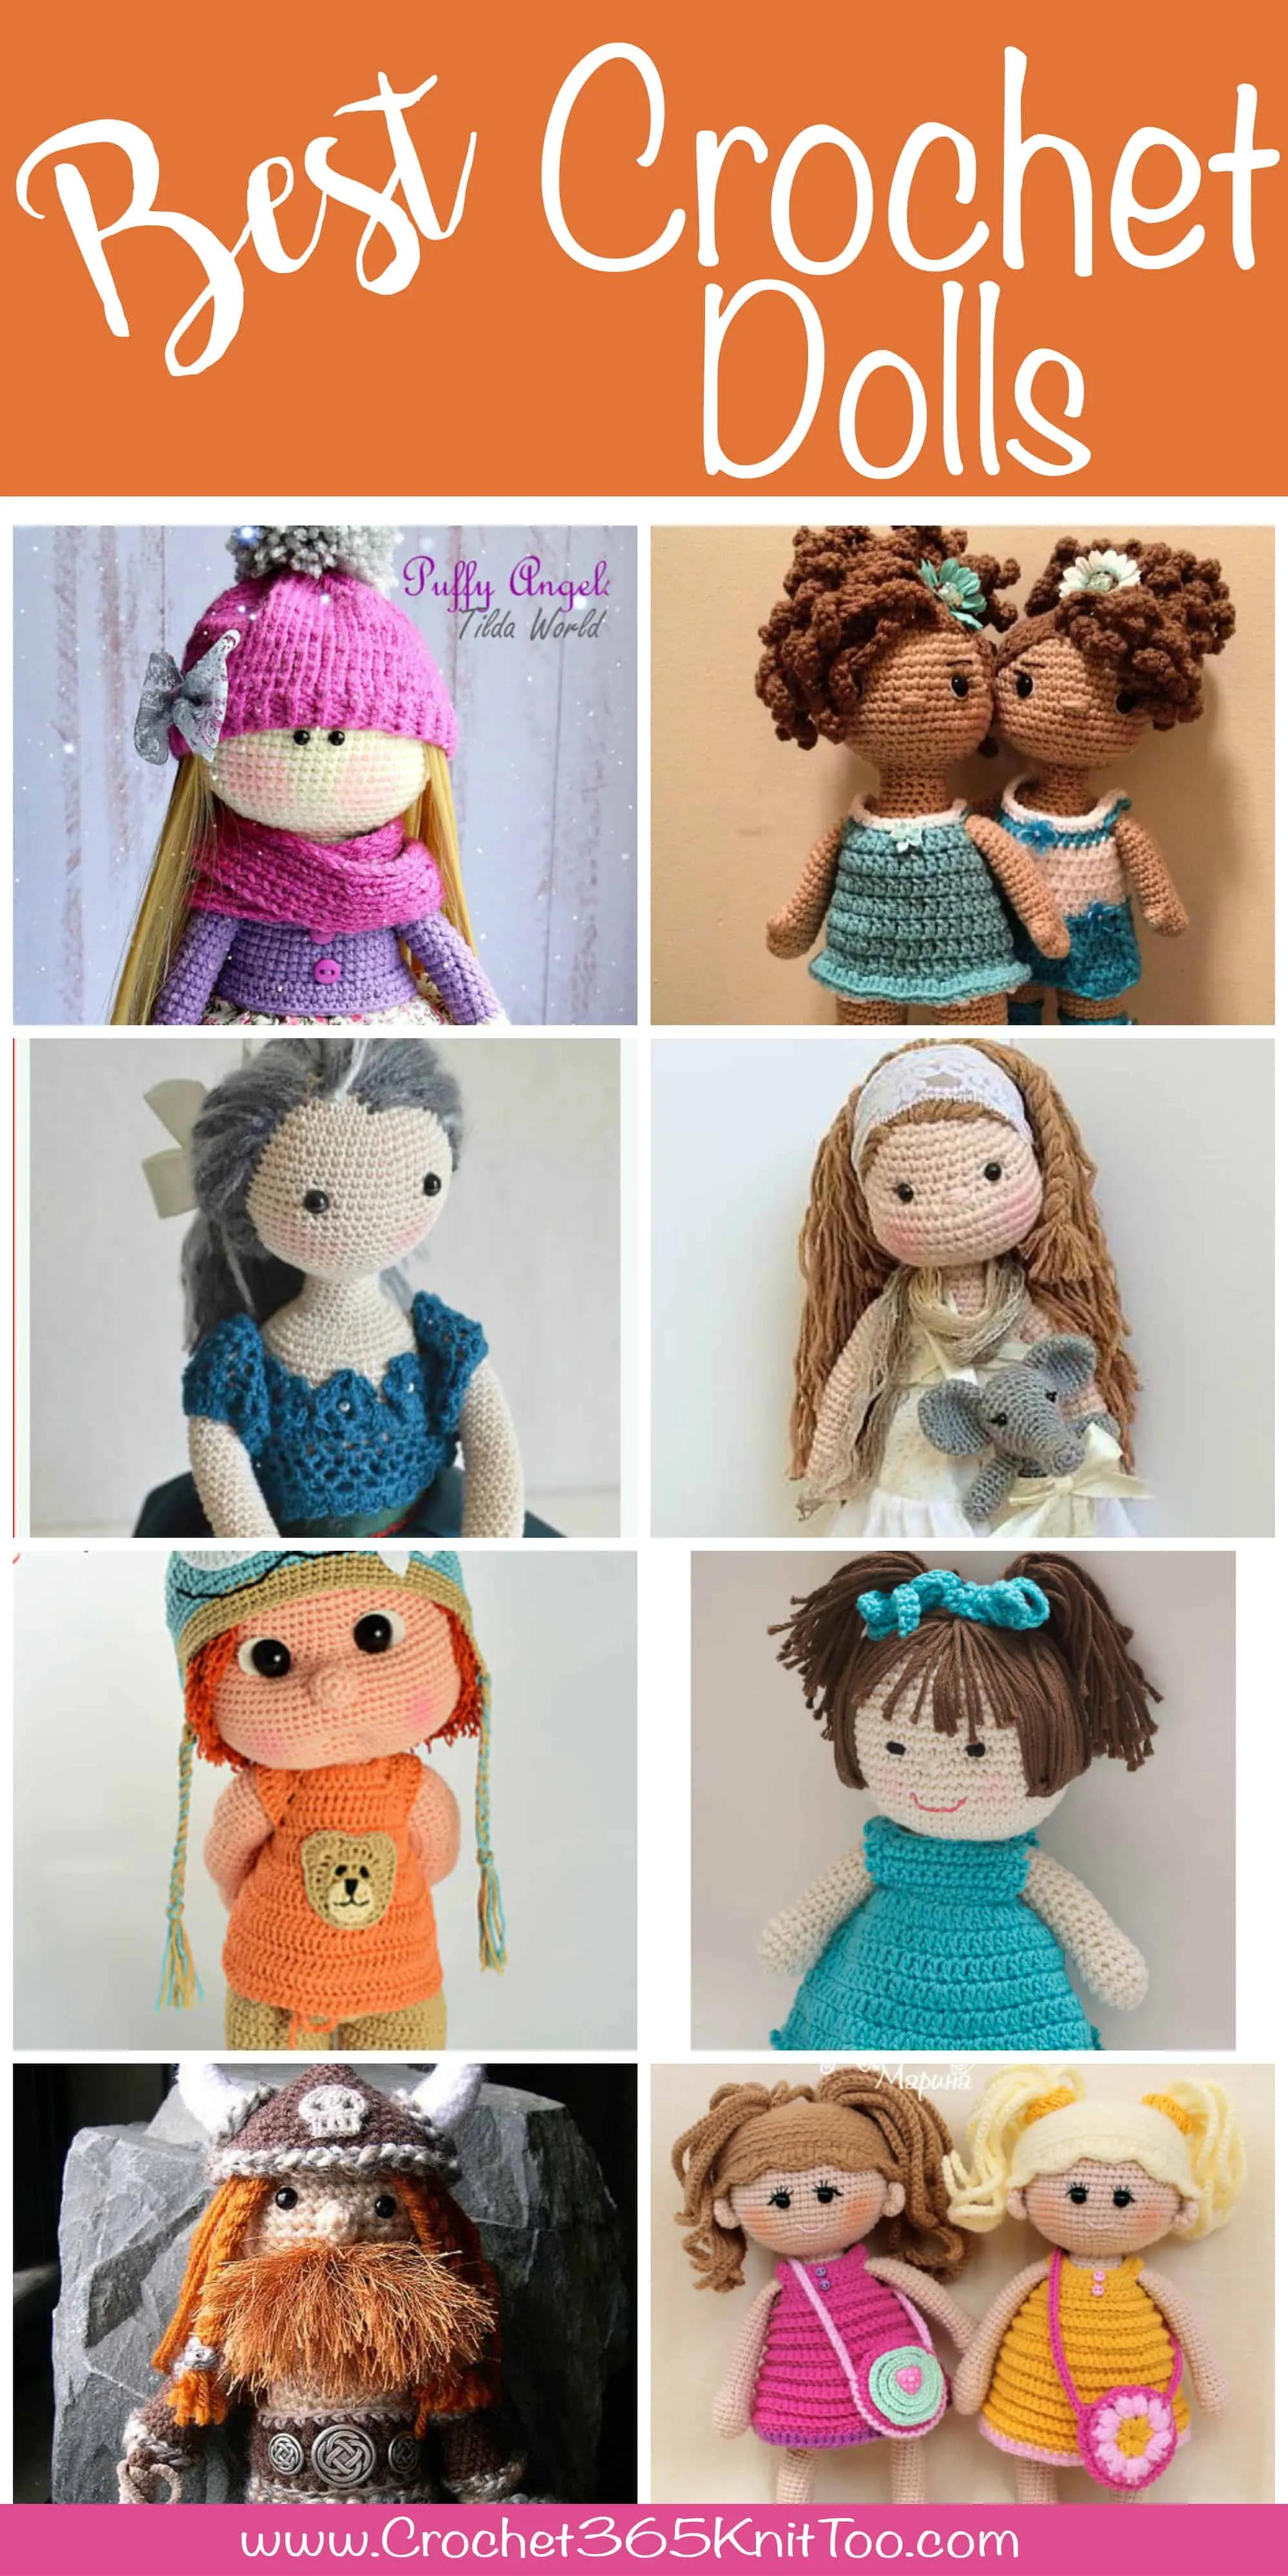 Graphic of several crochet dolls